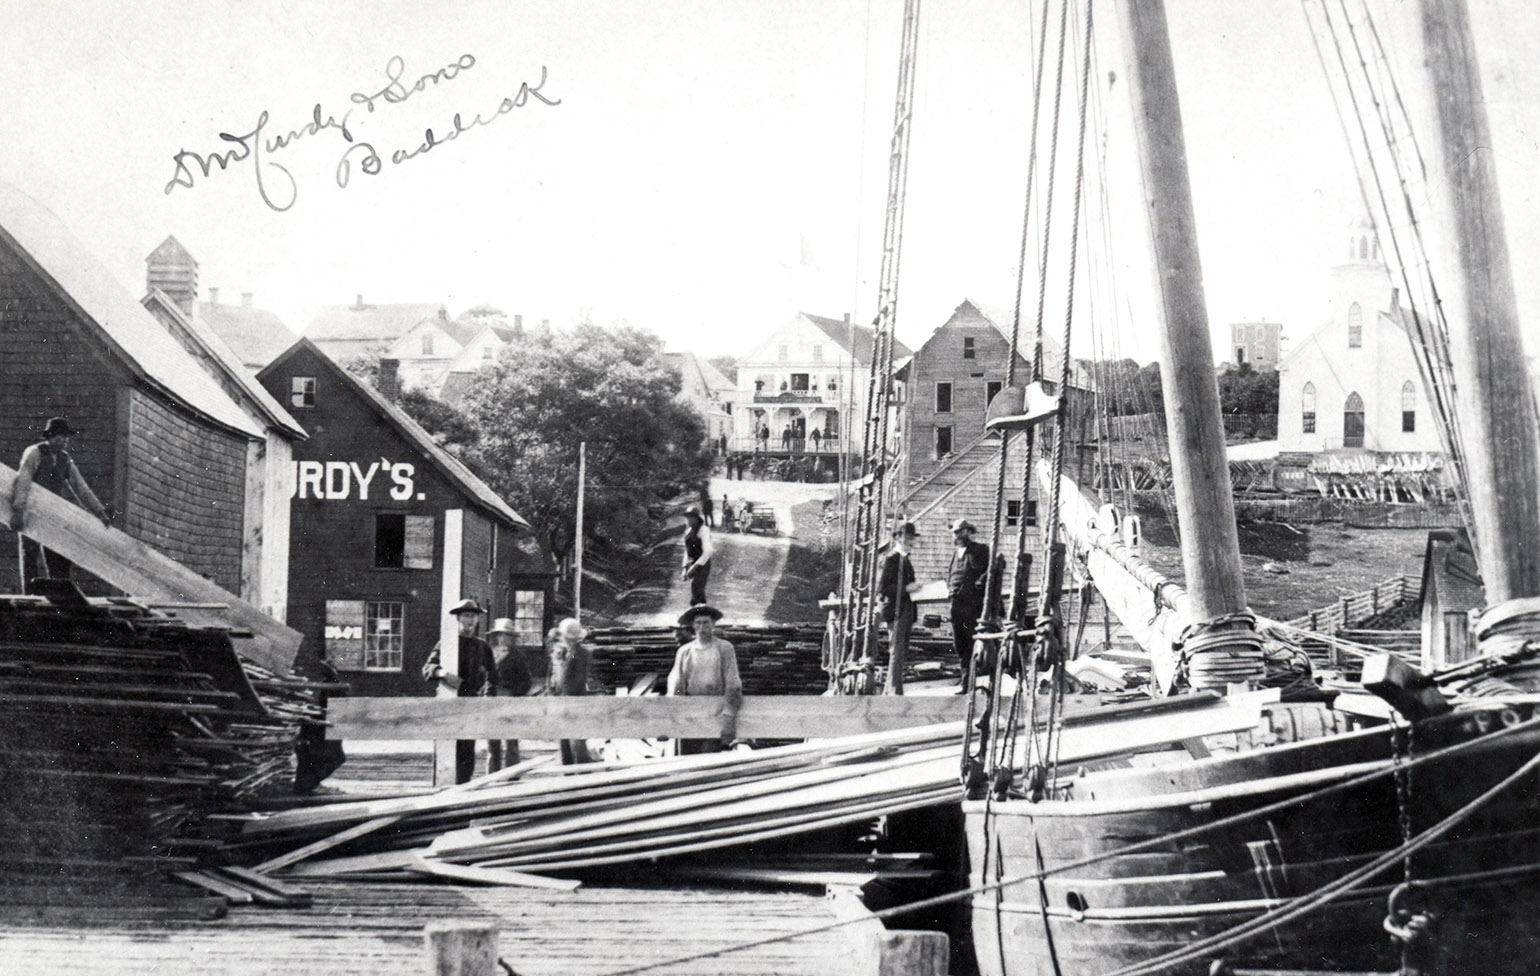 communityalbums - McCurdy and Sons General Store and McCurdy's Wharf